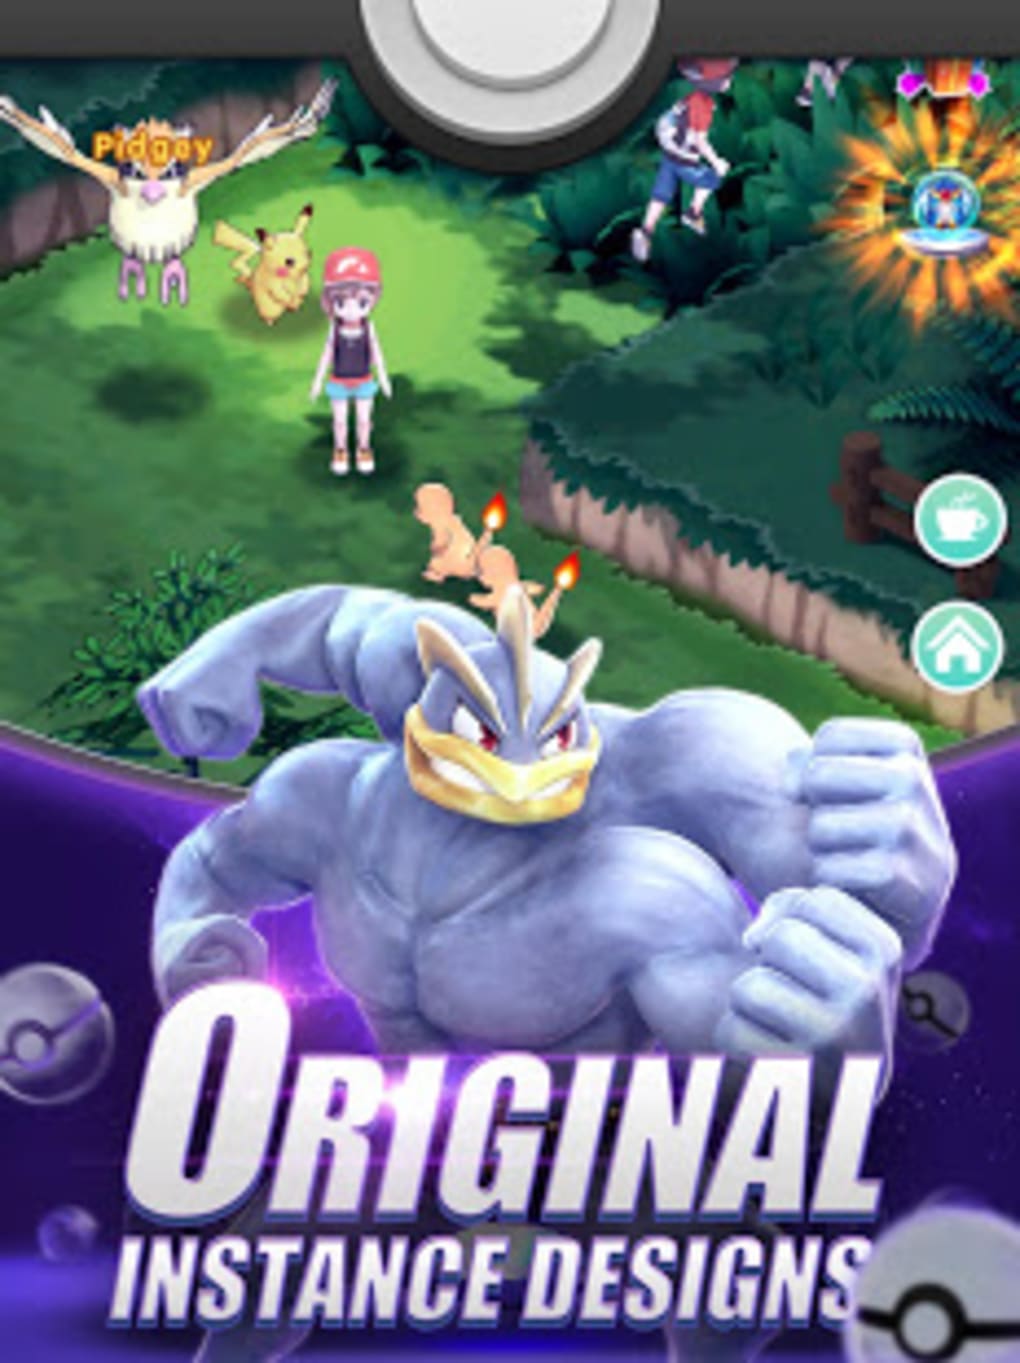 monster park pokemon game download for android